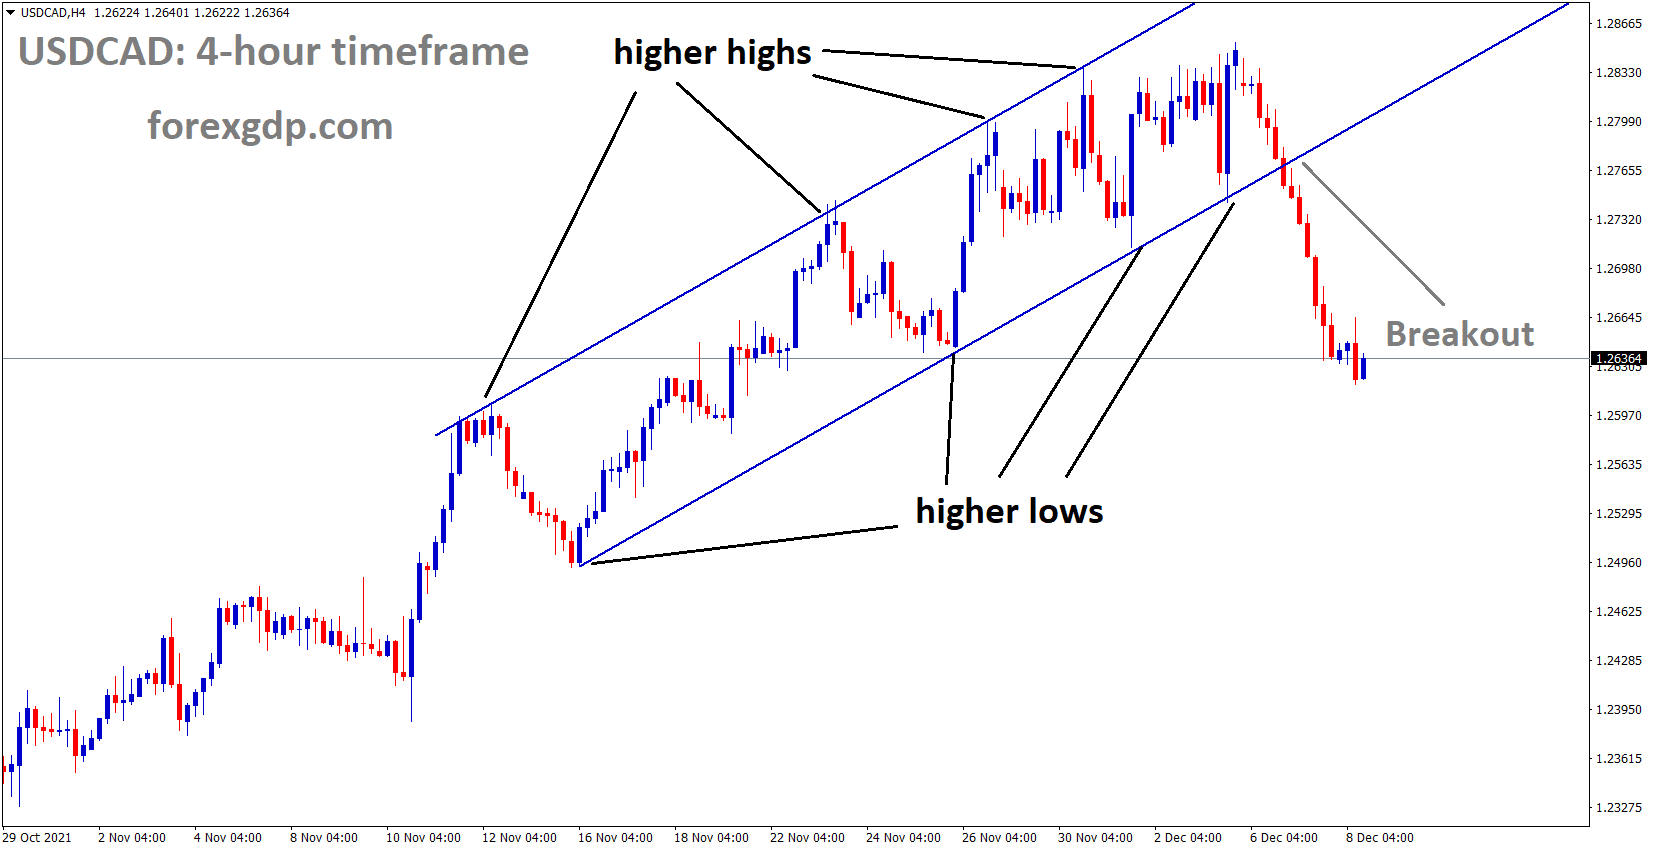 USDCAD has broken the Ascending channel and reached the horizontal support area